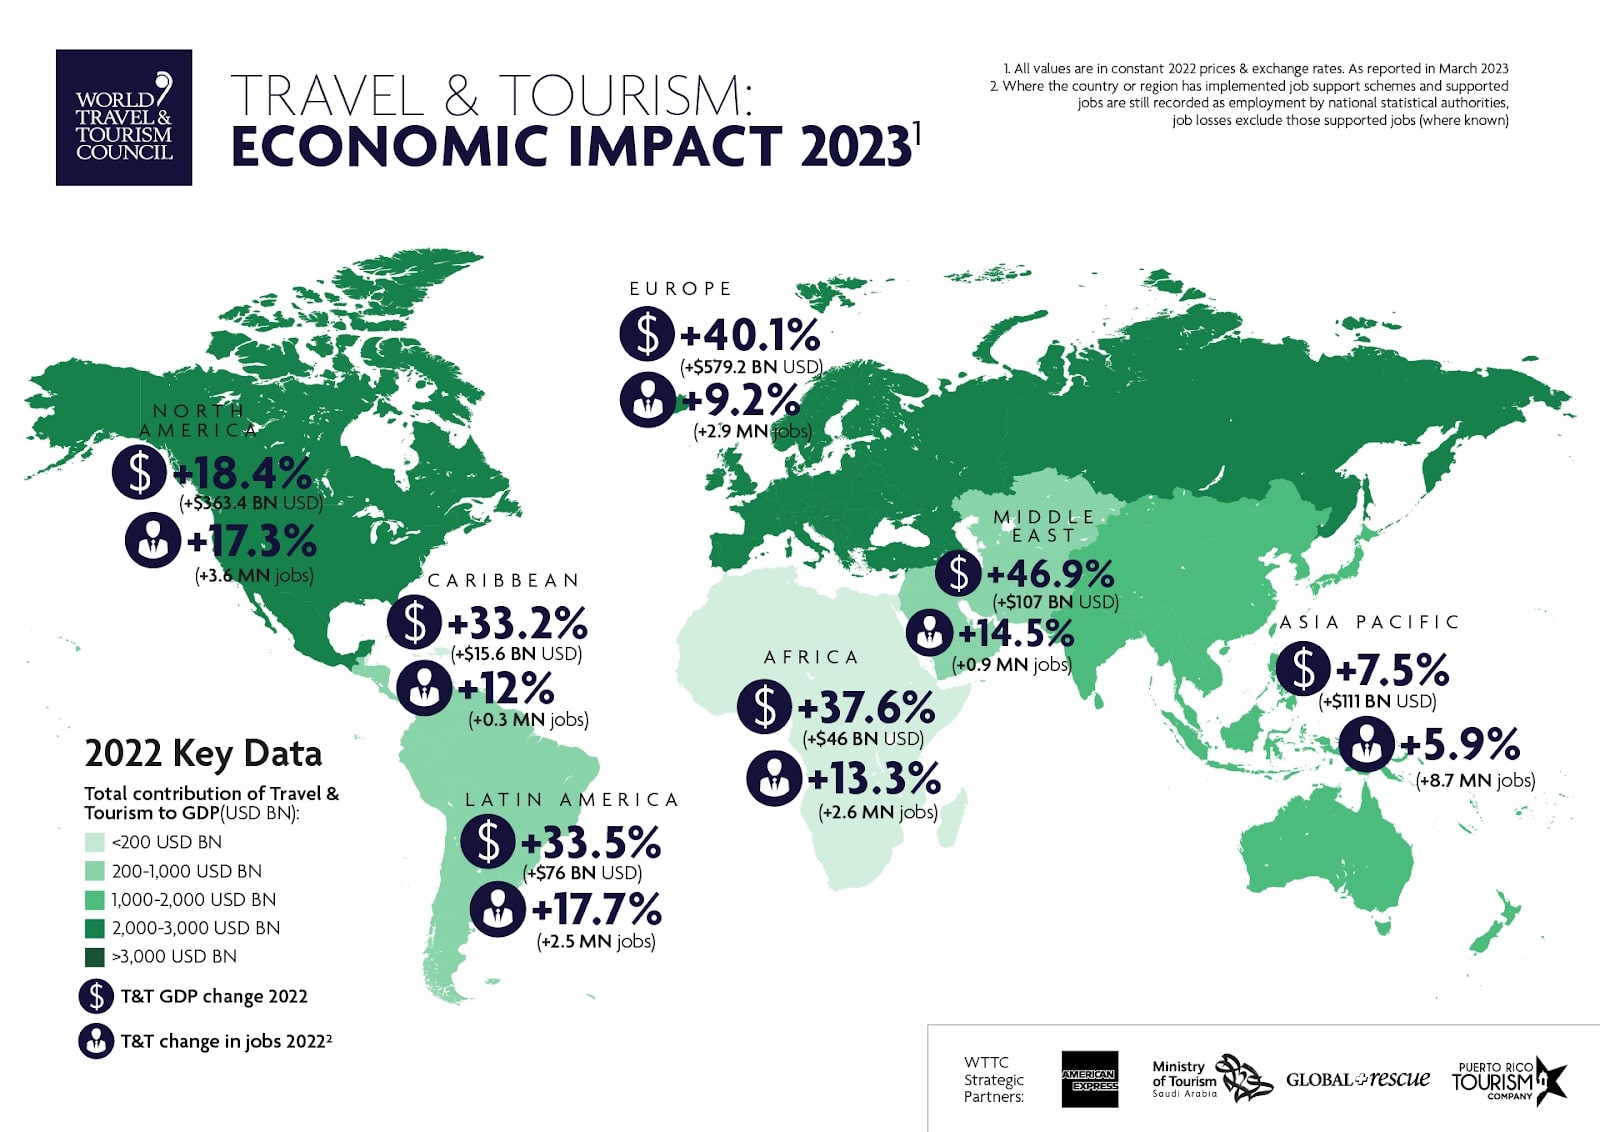 Asia-Pacific travel and tourism statistics in 2023 Image 1